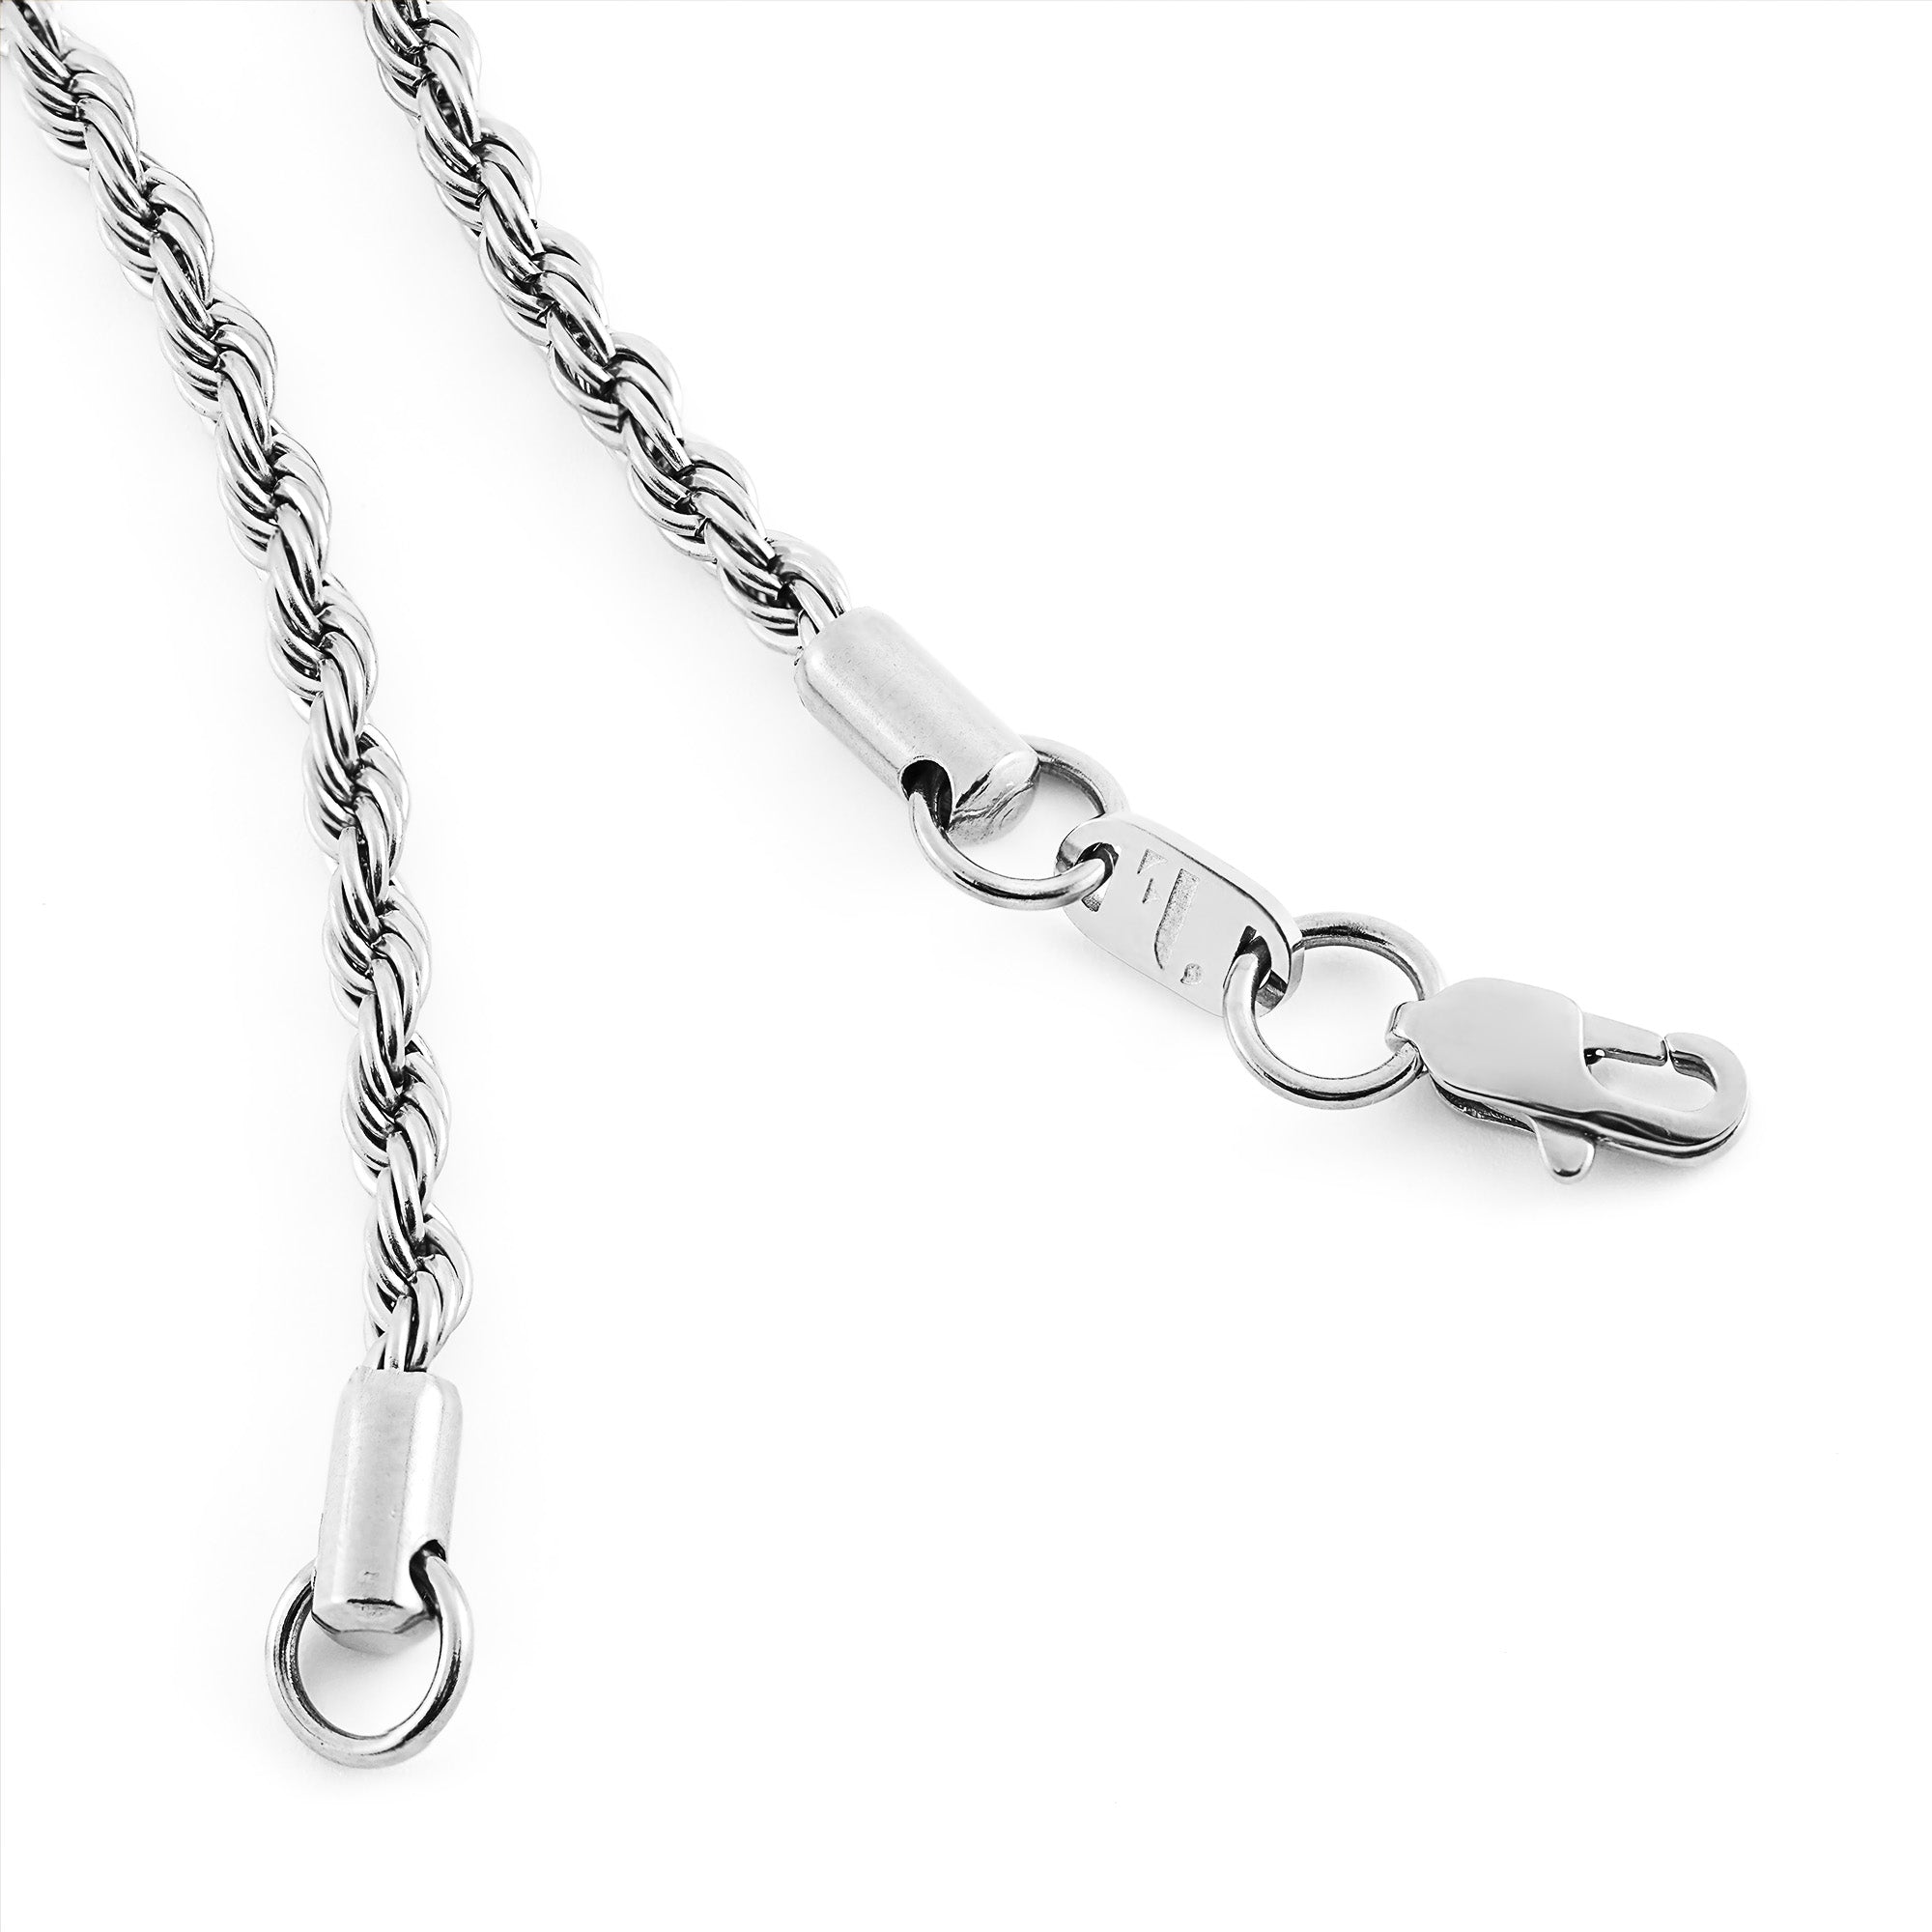 Donna women's necklace by Five Jwlry, crafted from a bold 3.5mm French rope twisted chain in silver-colored, water-resistant 316L stainless steel. Available in sizes 45cm and 50cm. Hypoallergenic with a 2-year warranty.